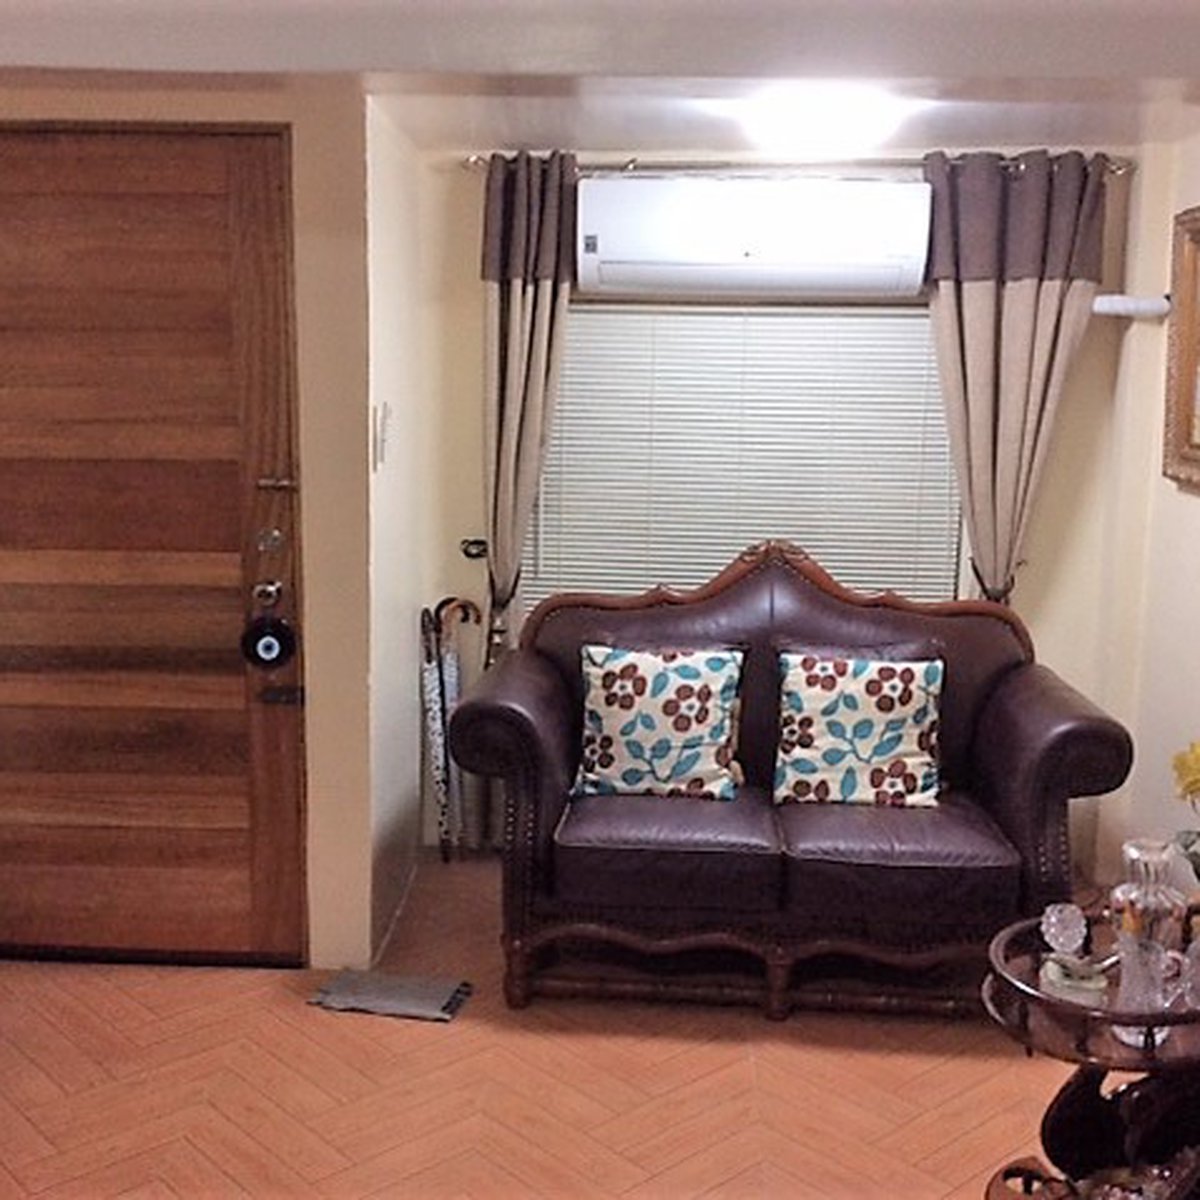 2 Bedroom RFO Townhouse For Sale in Las Pinas